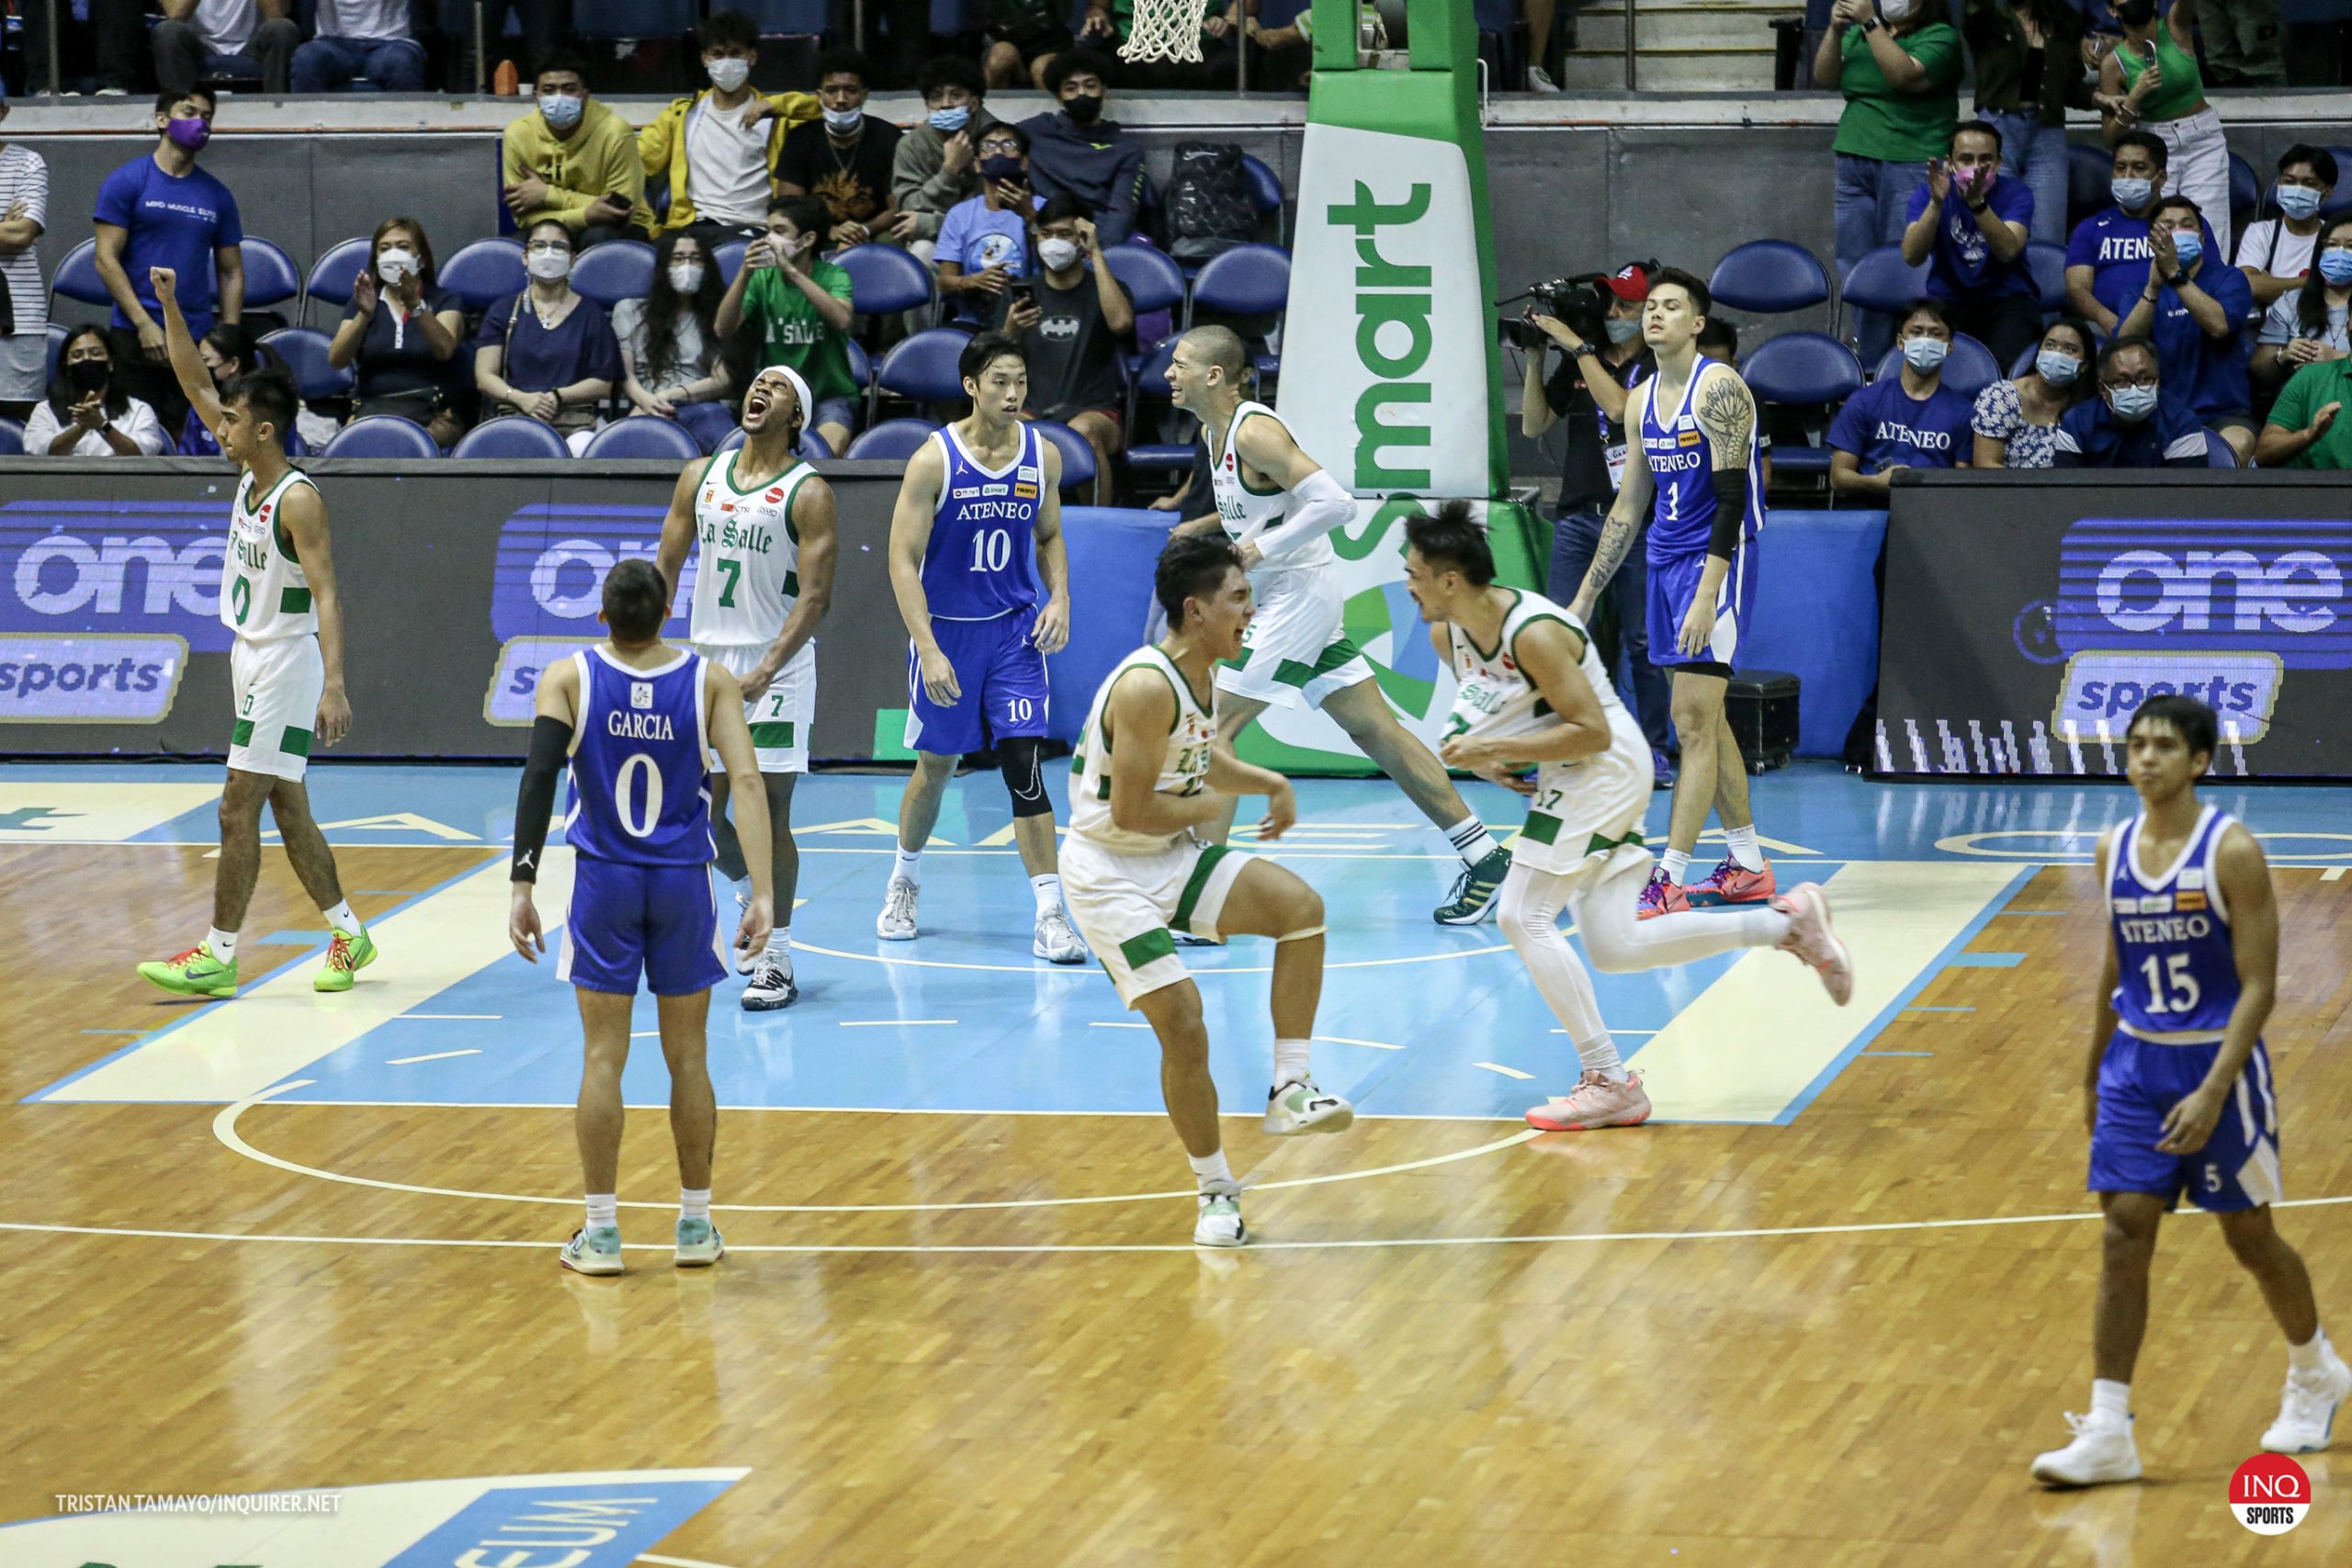 Winston hits clutch pictures as La Salle logs first victory over Ateneo in 5 years